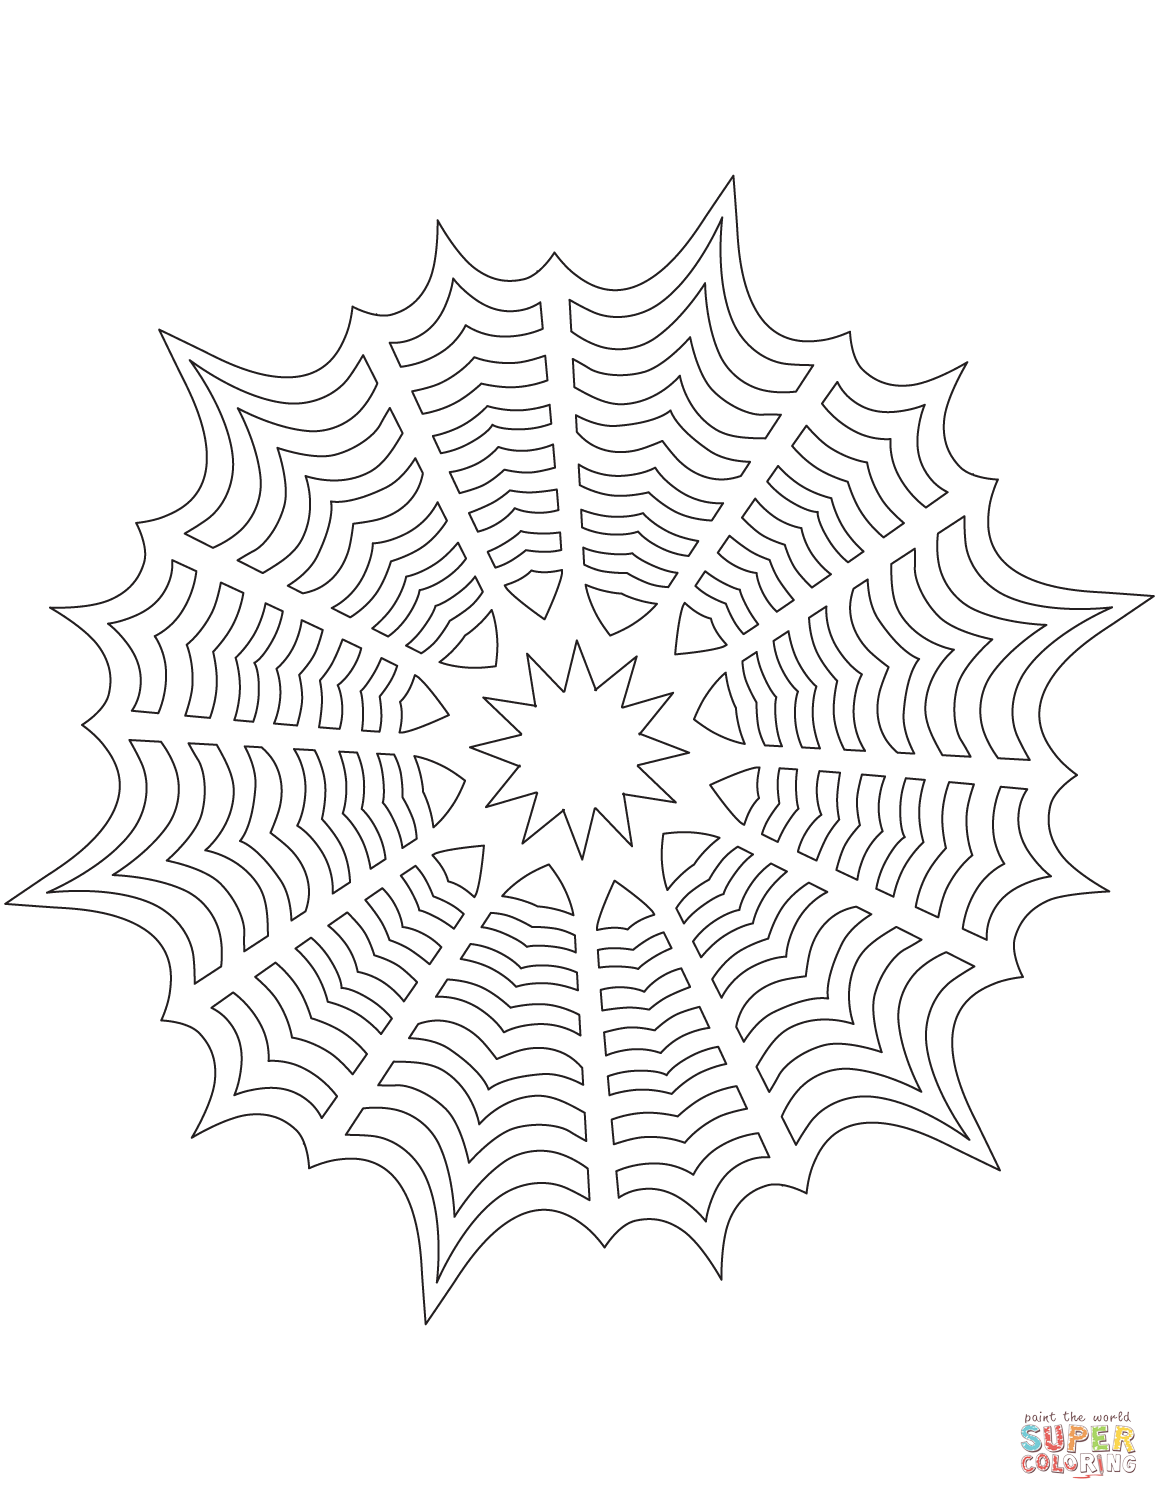 Snowflake with spiderweb pattern coloring page free printable coloring pages